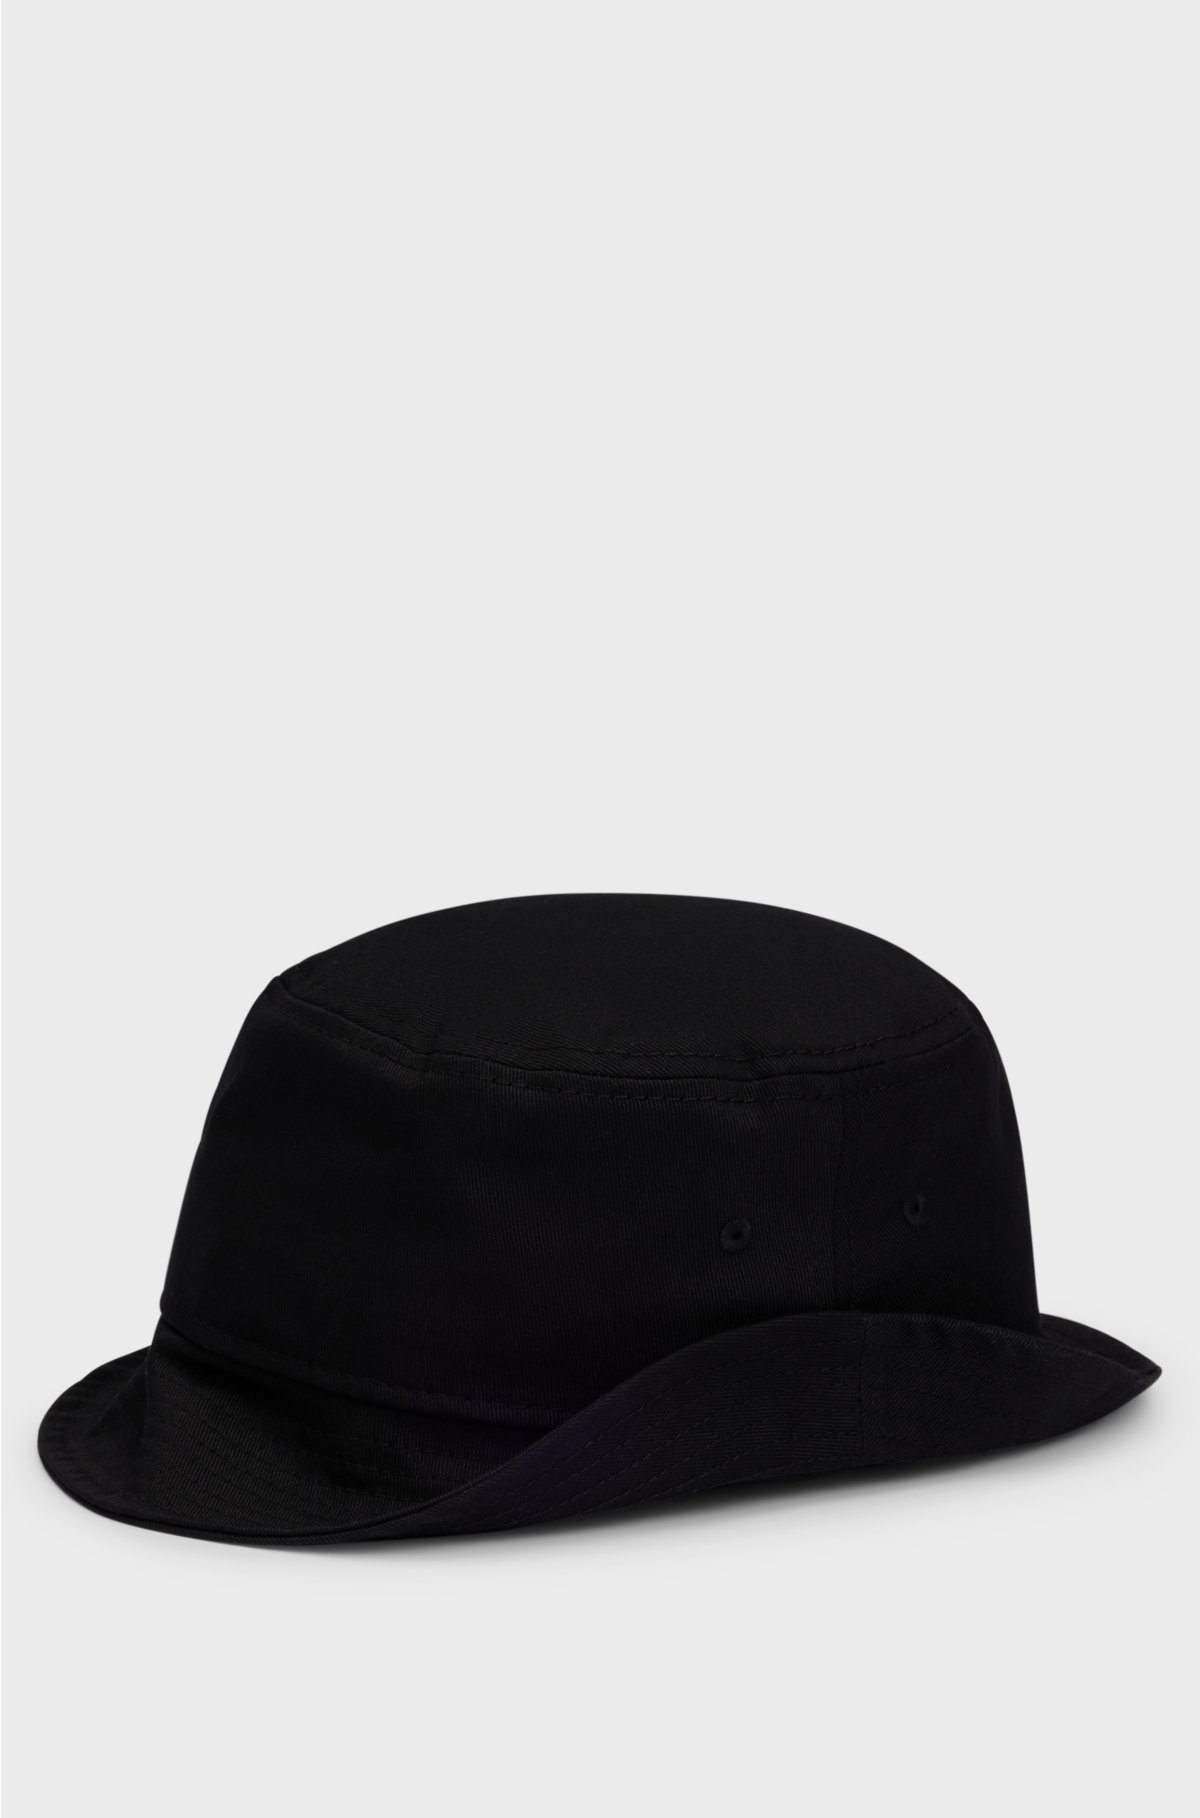 Bucket hat in cotton twill with red logo label, Black